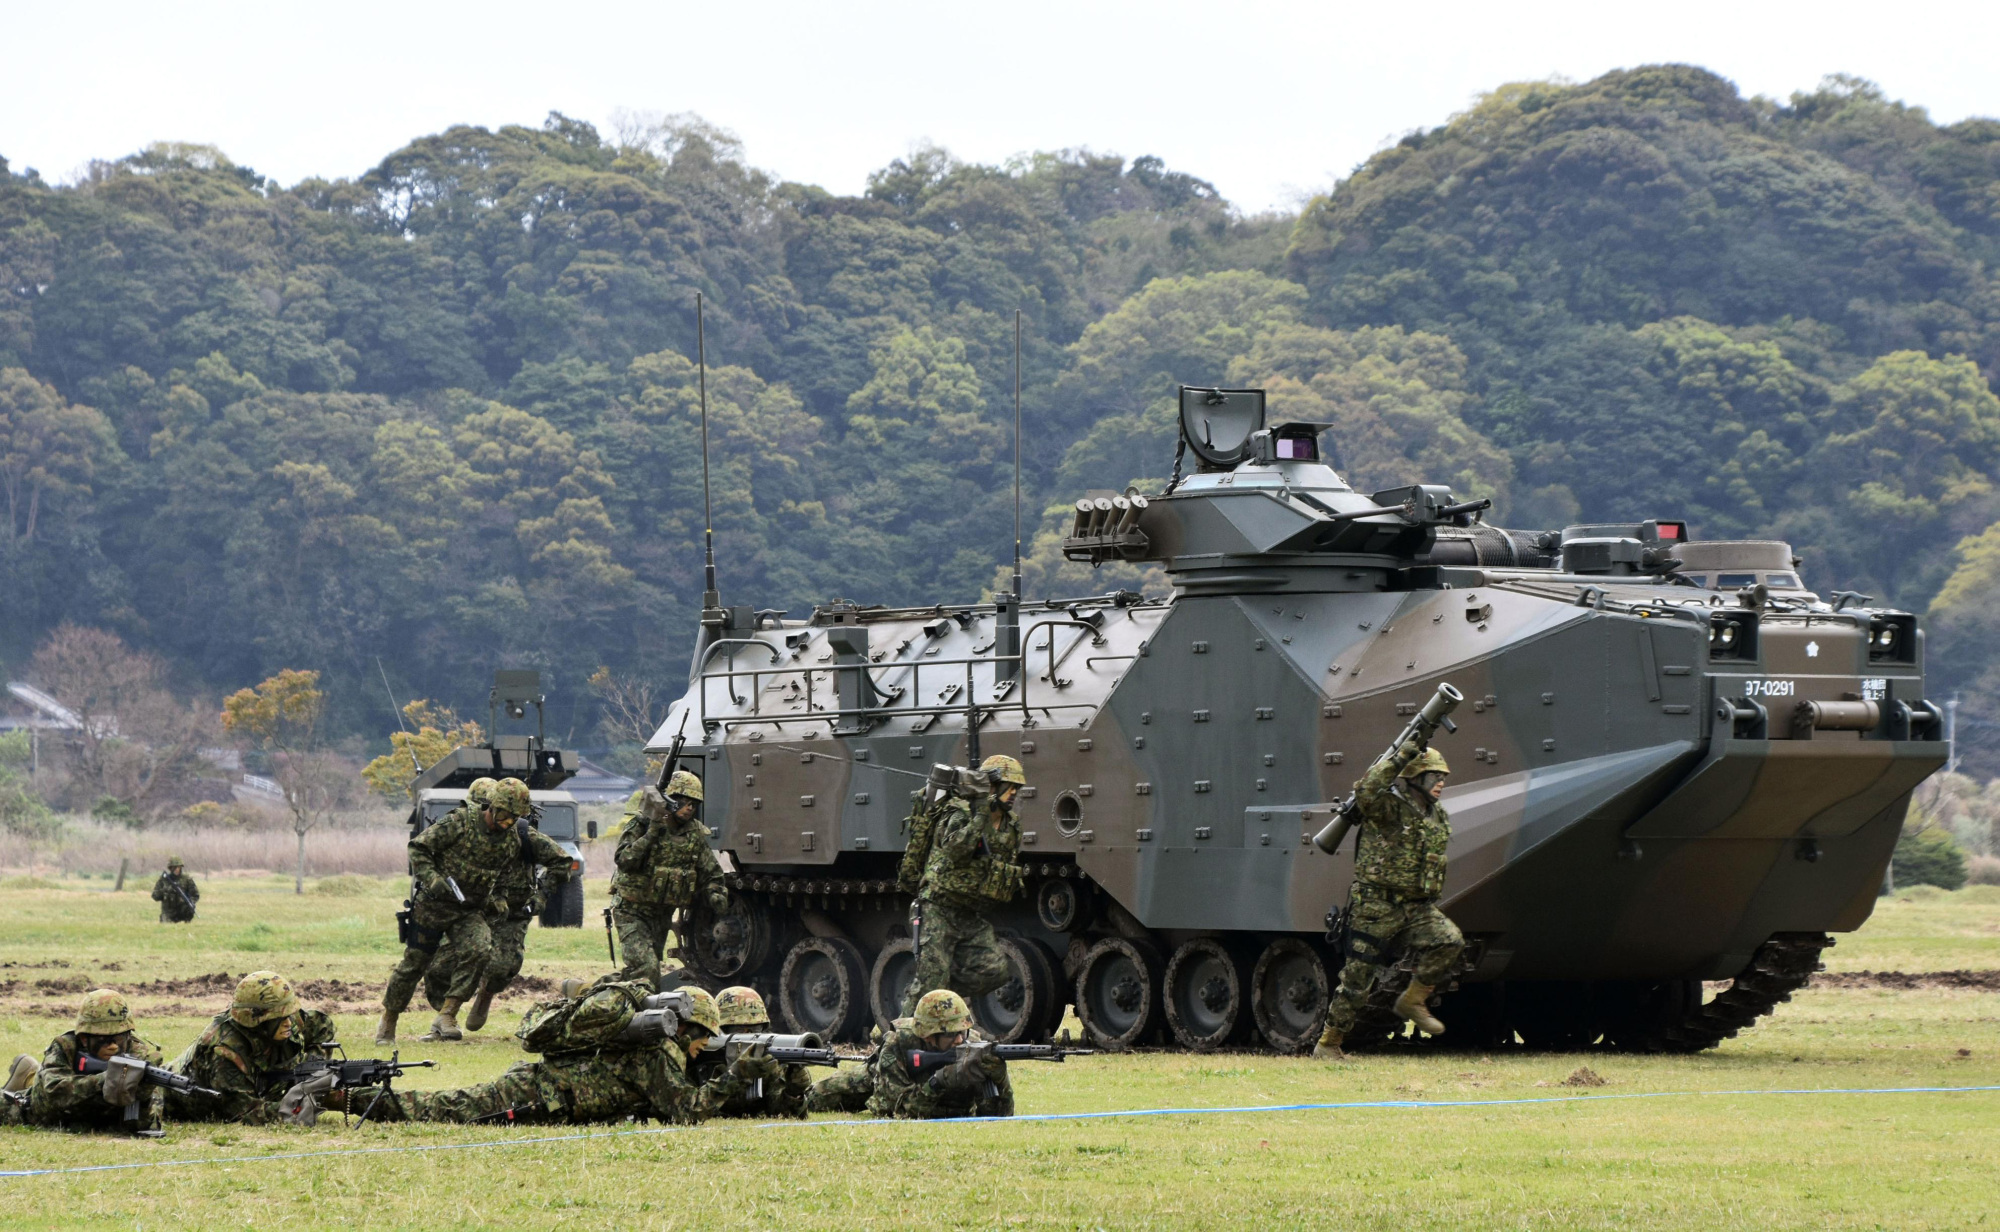 The Ground Self-Defense Force's new Amphibious Rapid Deployment Brigade carries out a demonstration exercise April 7 in Sasebo, Nagasaki Prefecture. | KYODO